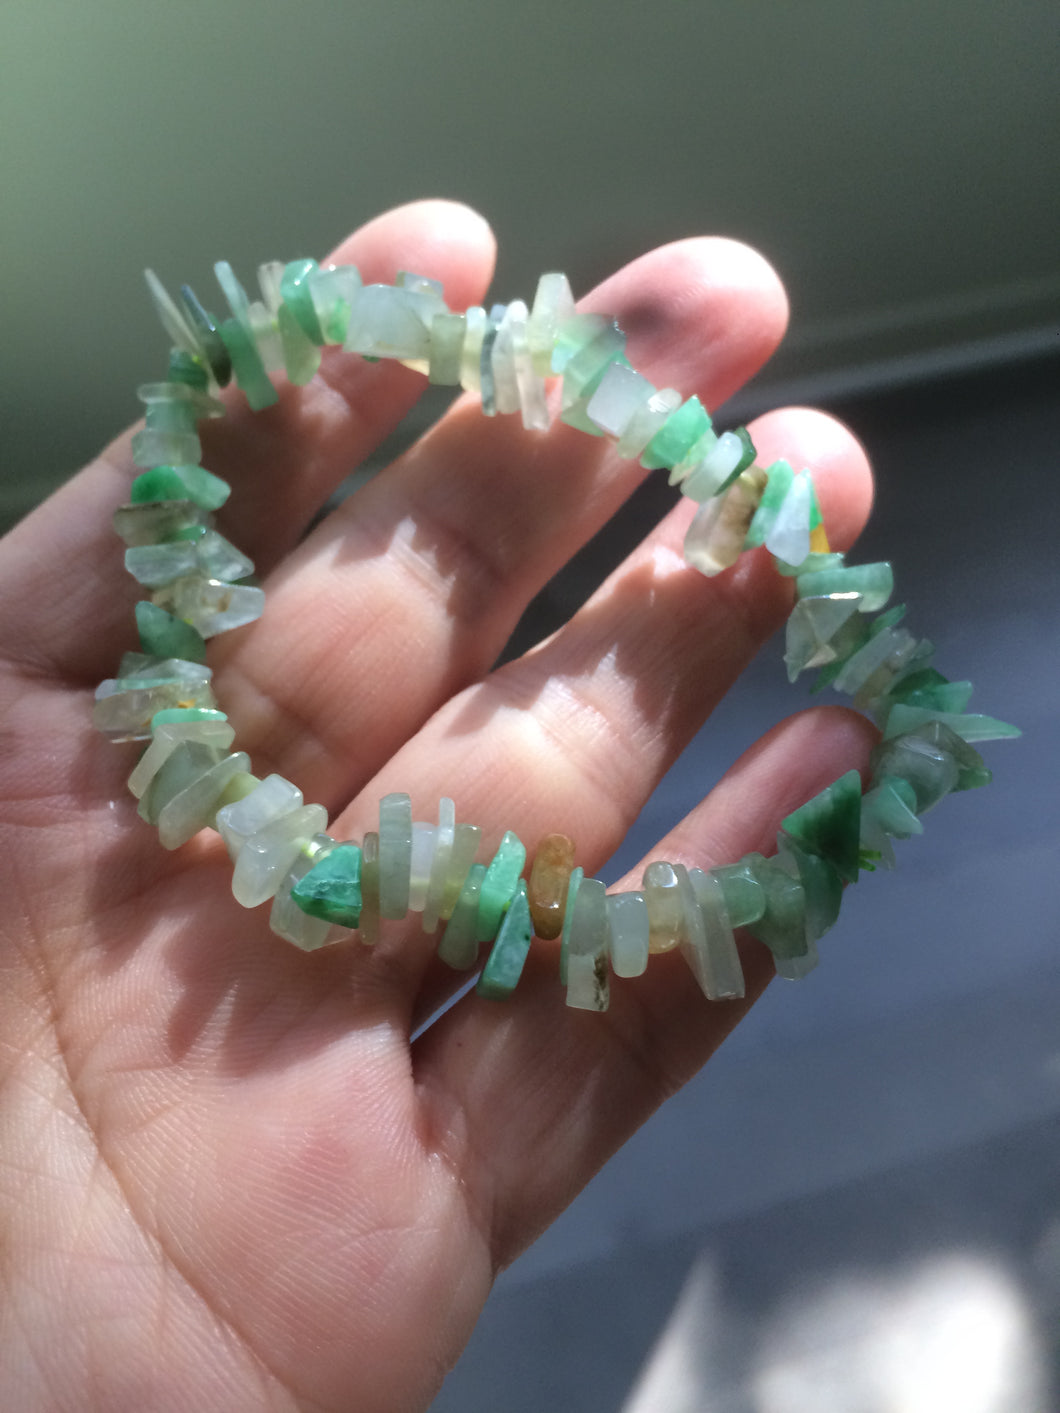 100% natural 9.6-10mm green/yellow/clear jadeite jade beads bracelet (Clearance item) SB